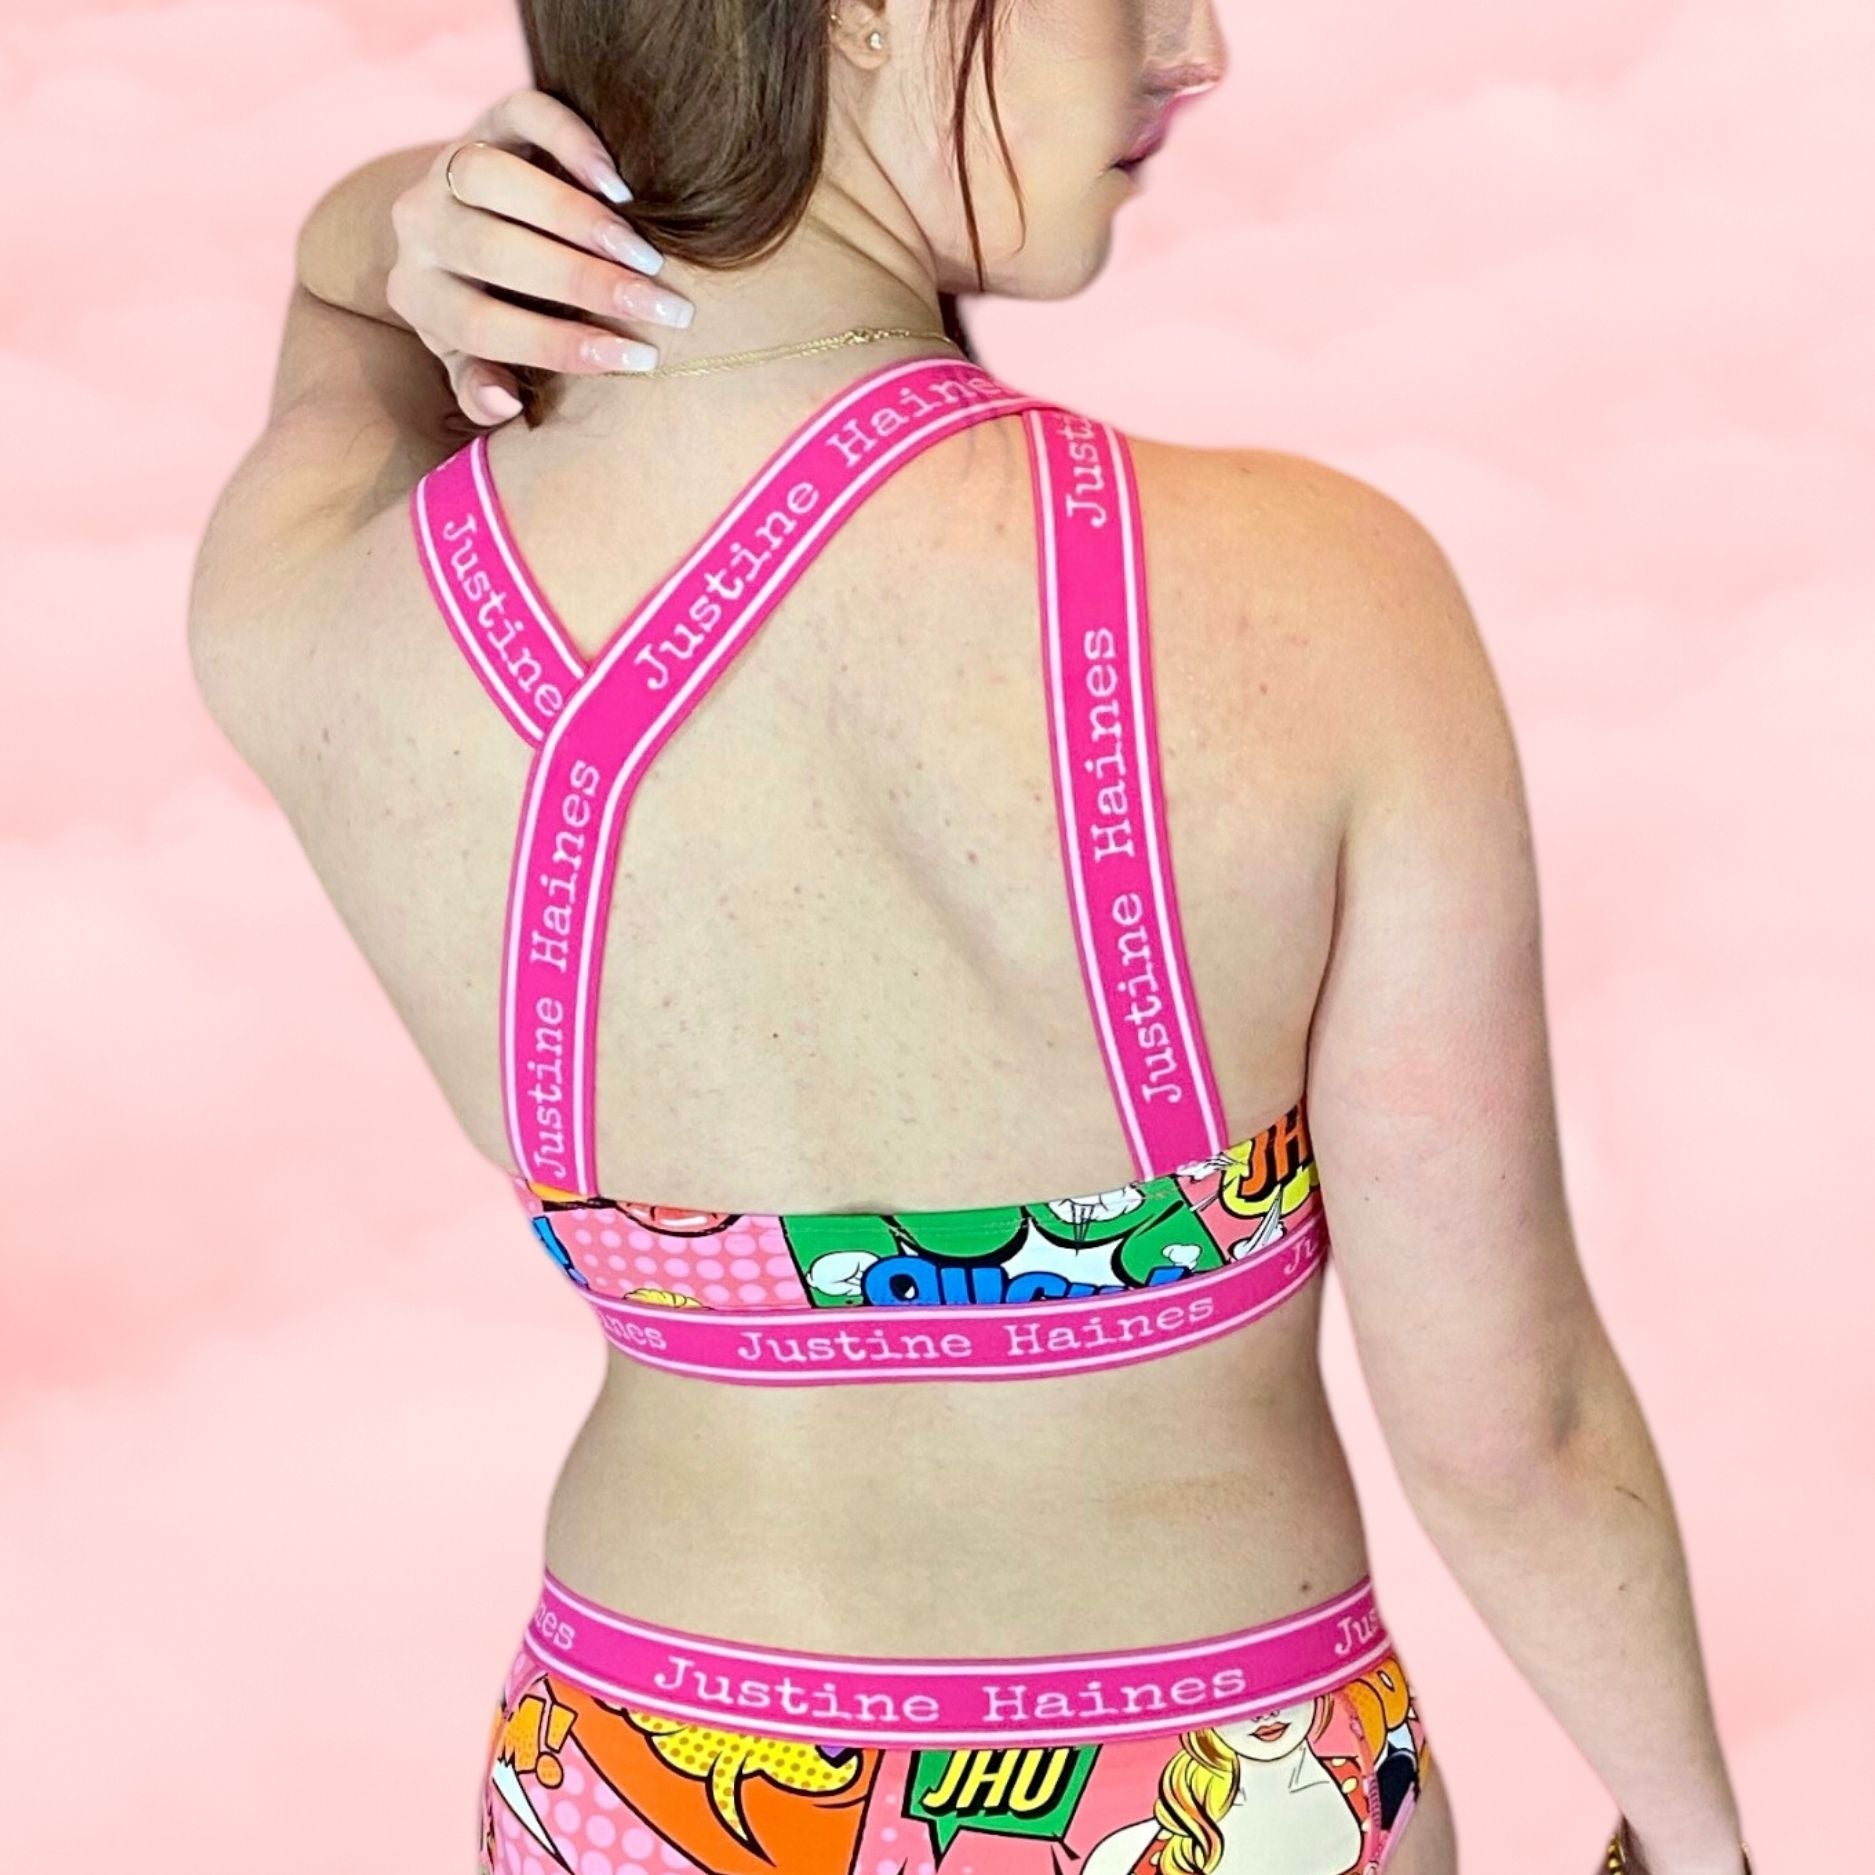 https://www.justinehaines.com/products/coolest-asymmetrical-strappy-bra-top-in-hot-pink-pop-art